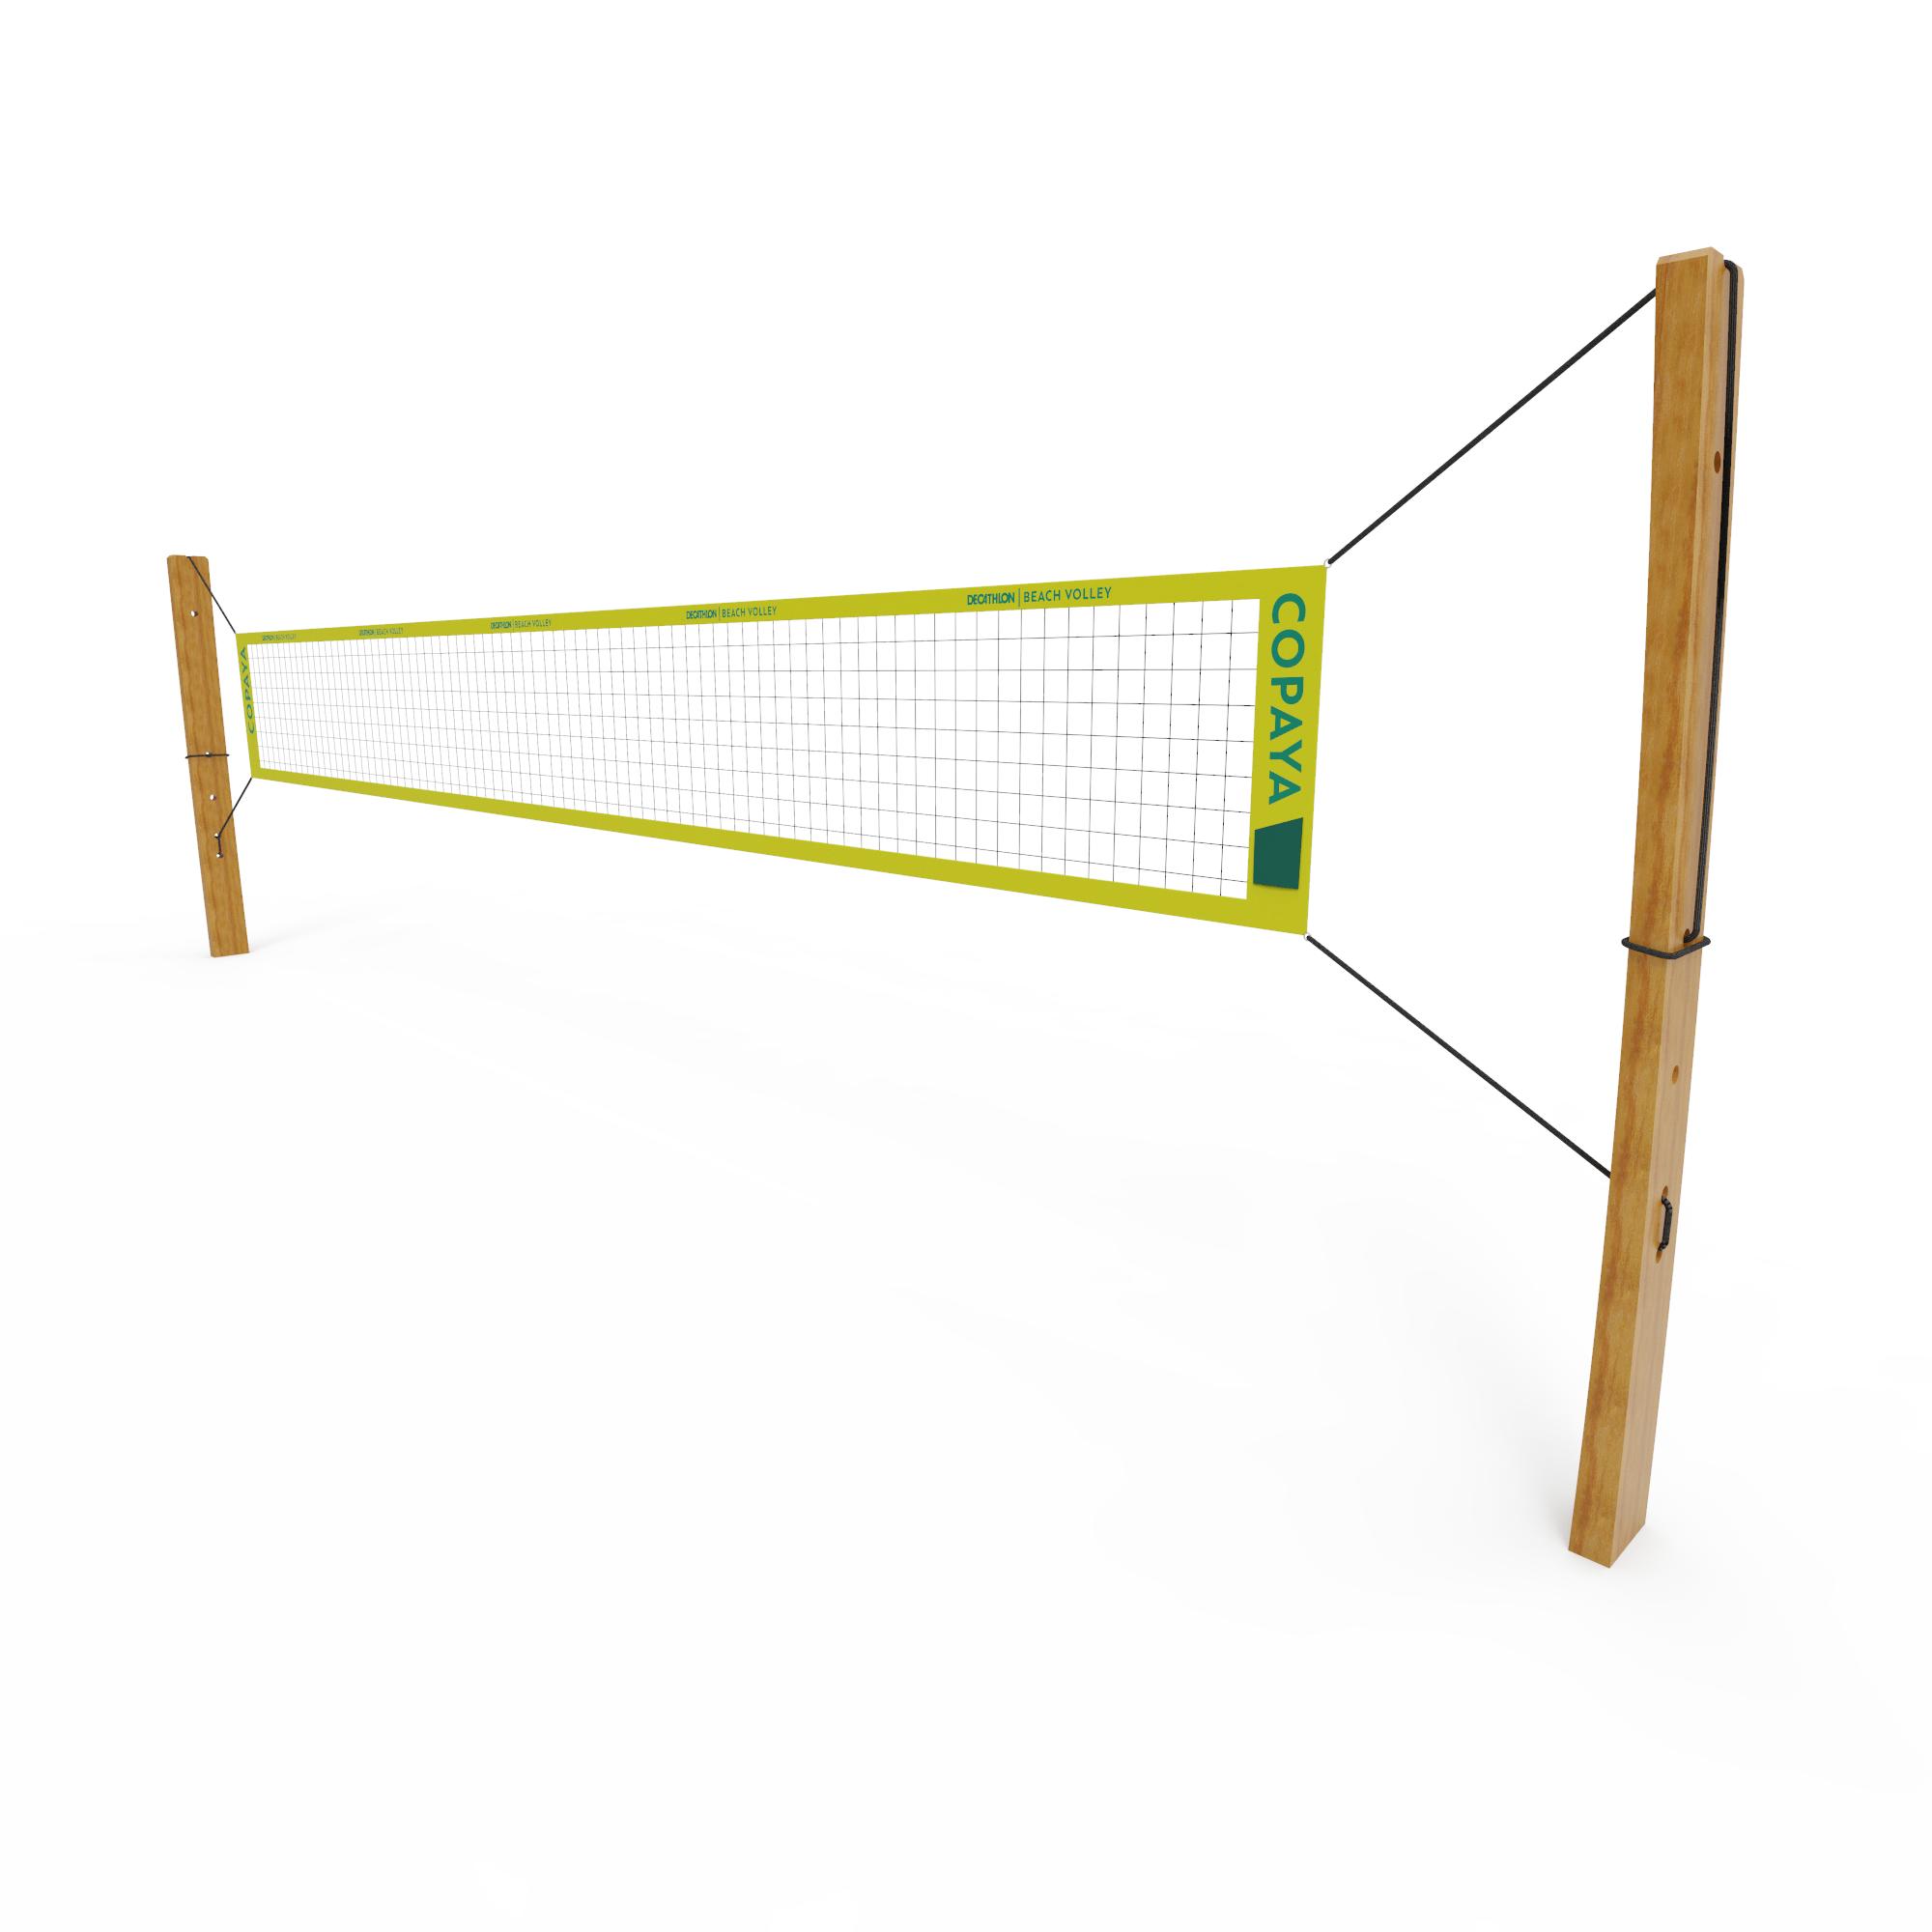 Beach Volleyball Net with Official Dimensions BVN900 1/11